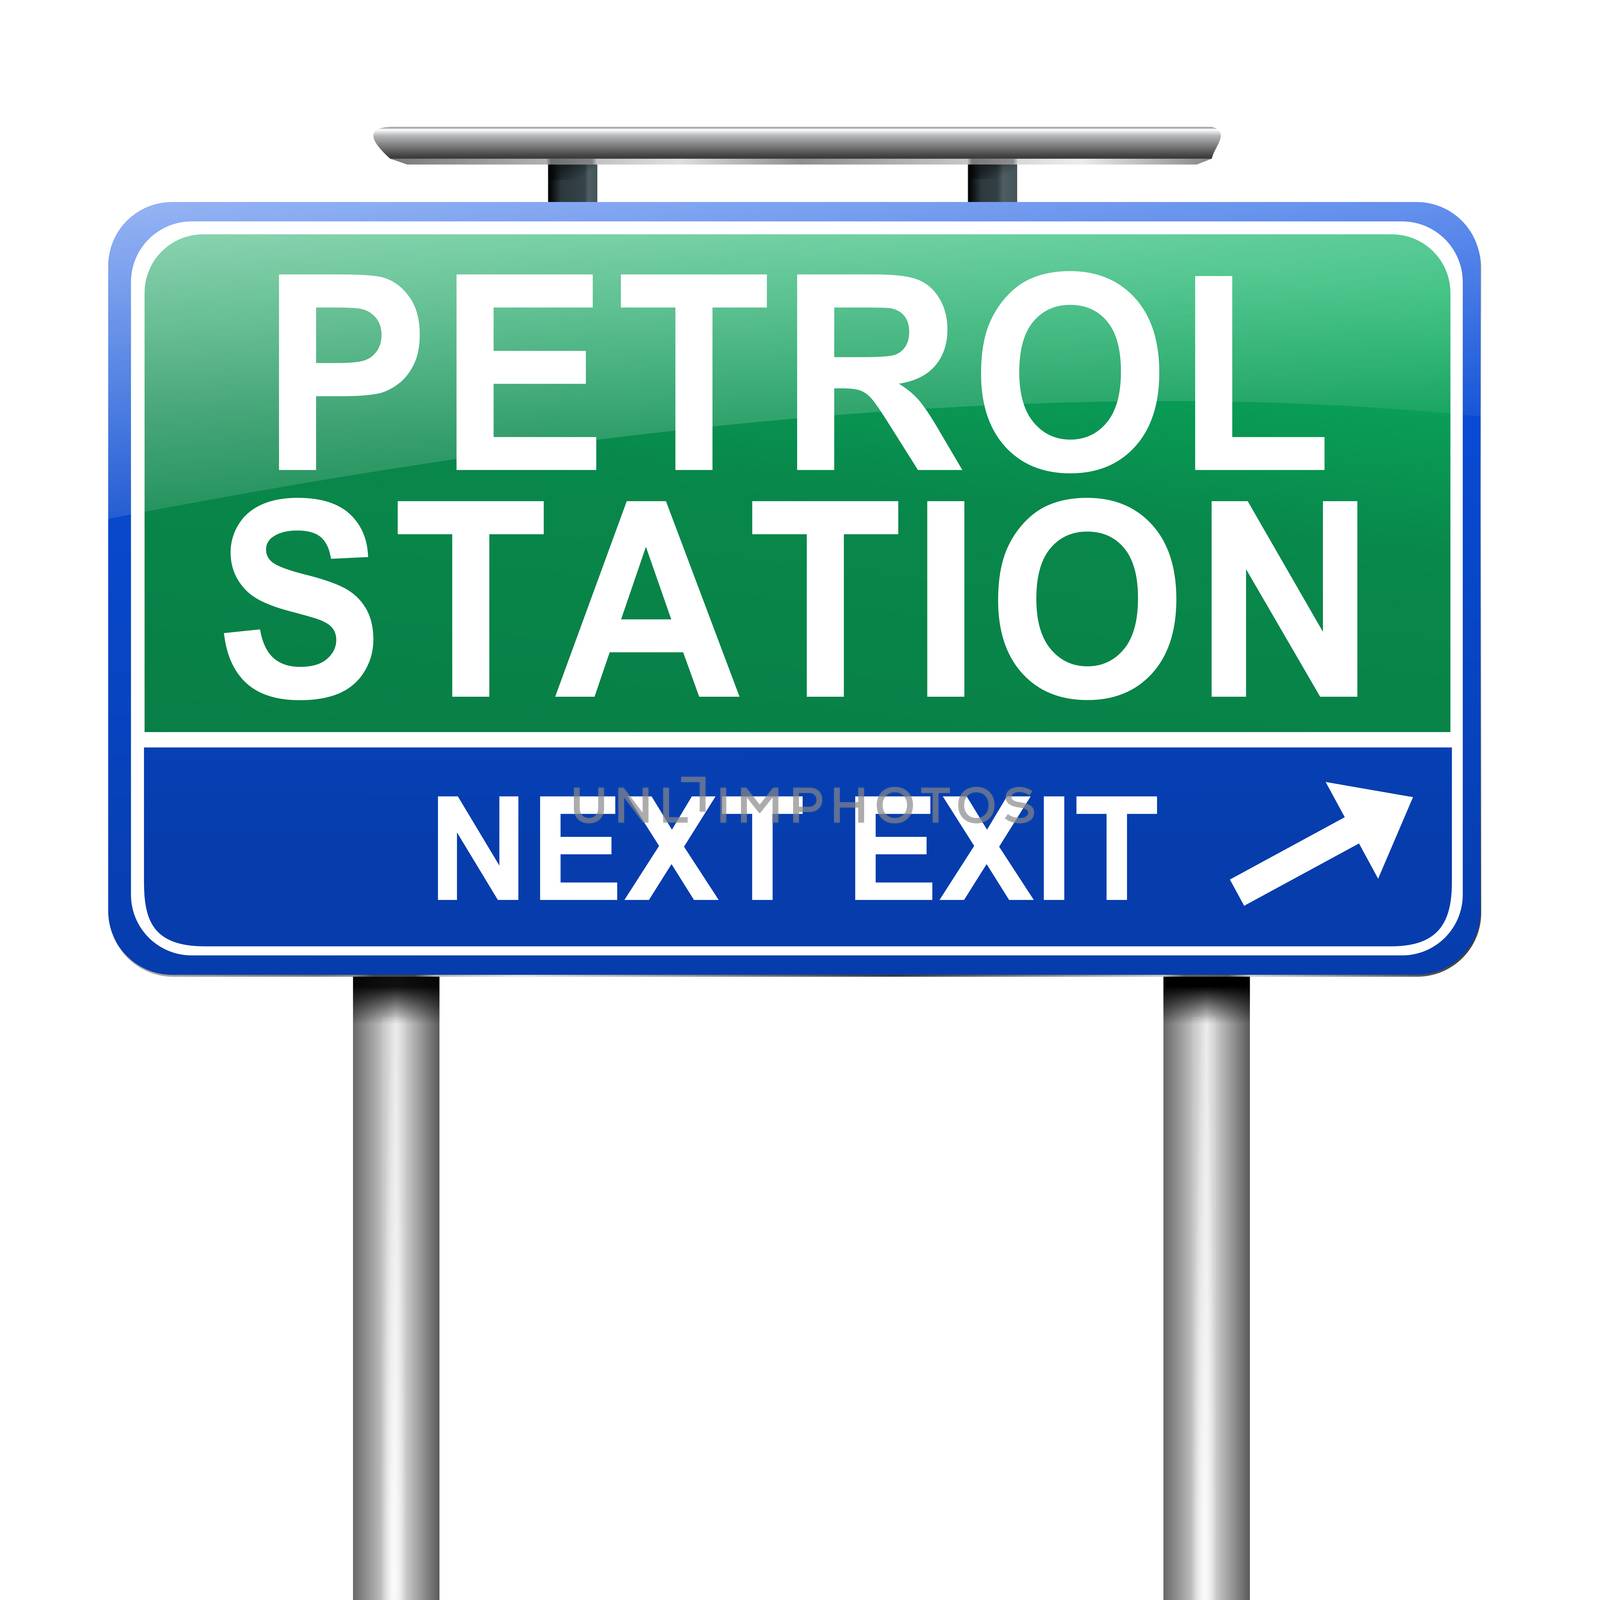 Illustration depicting a sign with a petrol station concept.